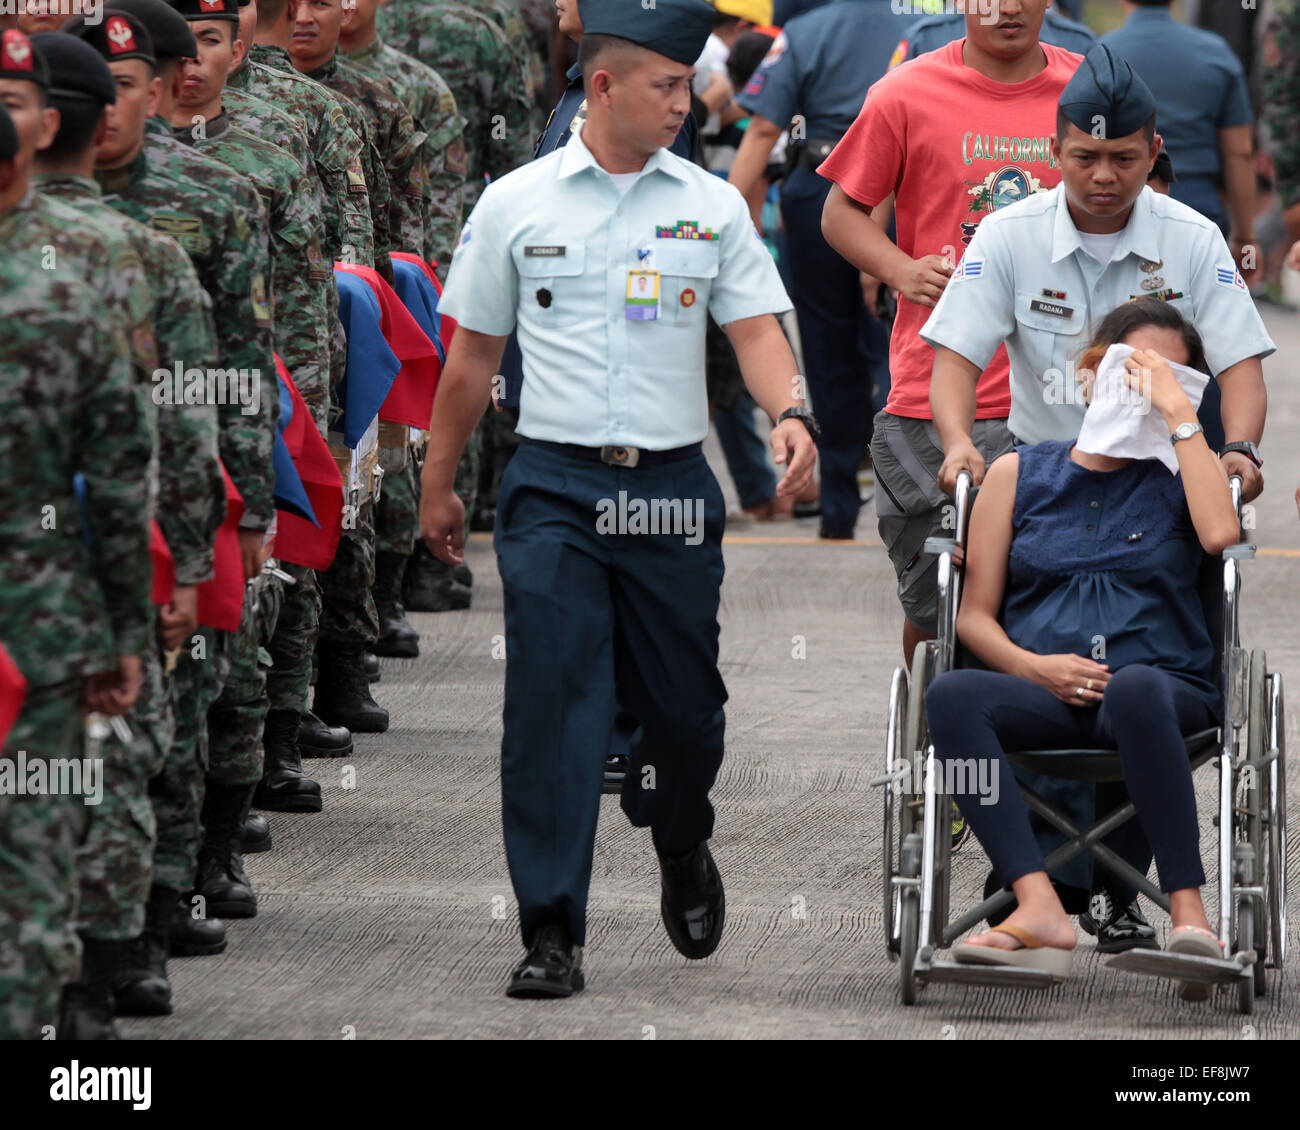 Pasay City, Philippines. 29th Jan, 2015. A pregnant relative of one of the fallen Philippine National Police Special Action Force (PNP-SAF) members sits in a wheelchair after fainting at the Villamor Air Base in Pasay City, the Philippines, Jan. 29, 2015. Forty-four members of the PNP-SAF were killed allegedly by Moro Islamic Liberation Front and Bangsamoro Islamic Freedom Fighters members on Jan. 25 in Mamasapano, Maguindanao. Credit:  Rouelle Umali/Xinhua/Alamy Live News Stock Photo